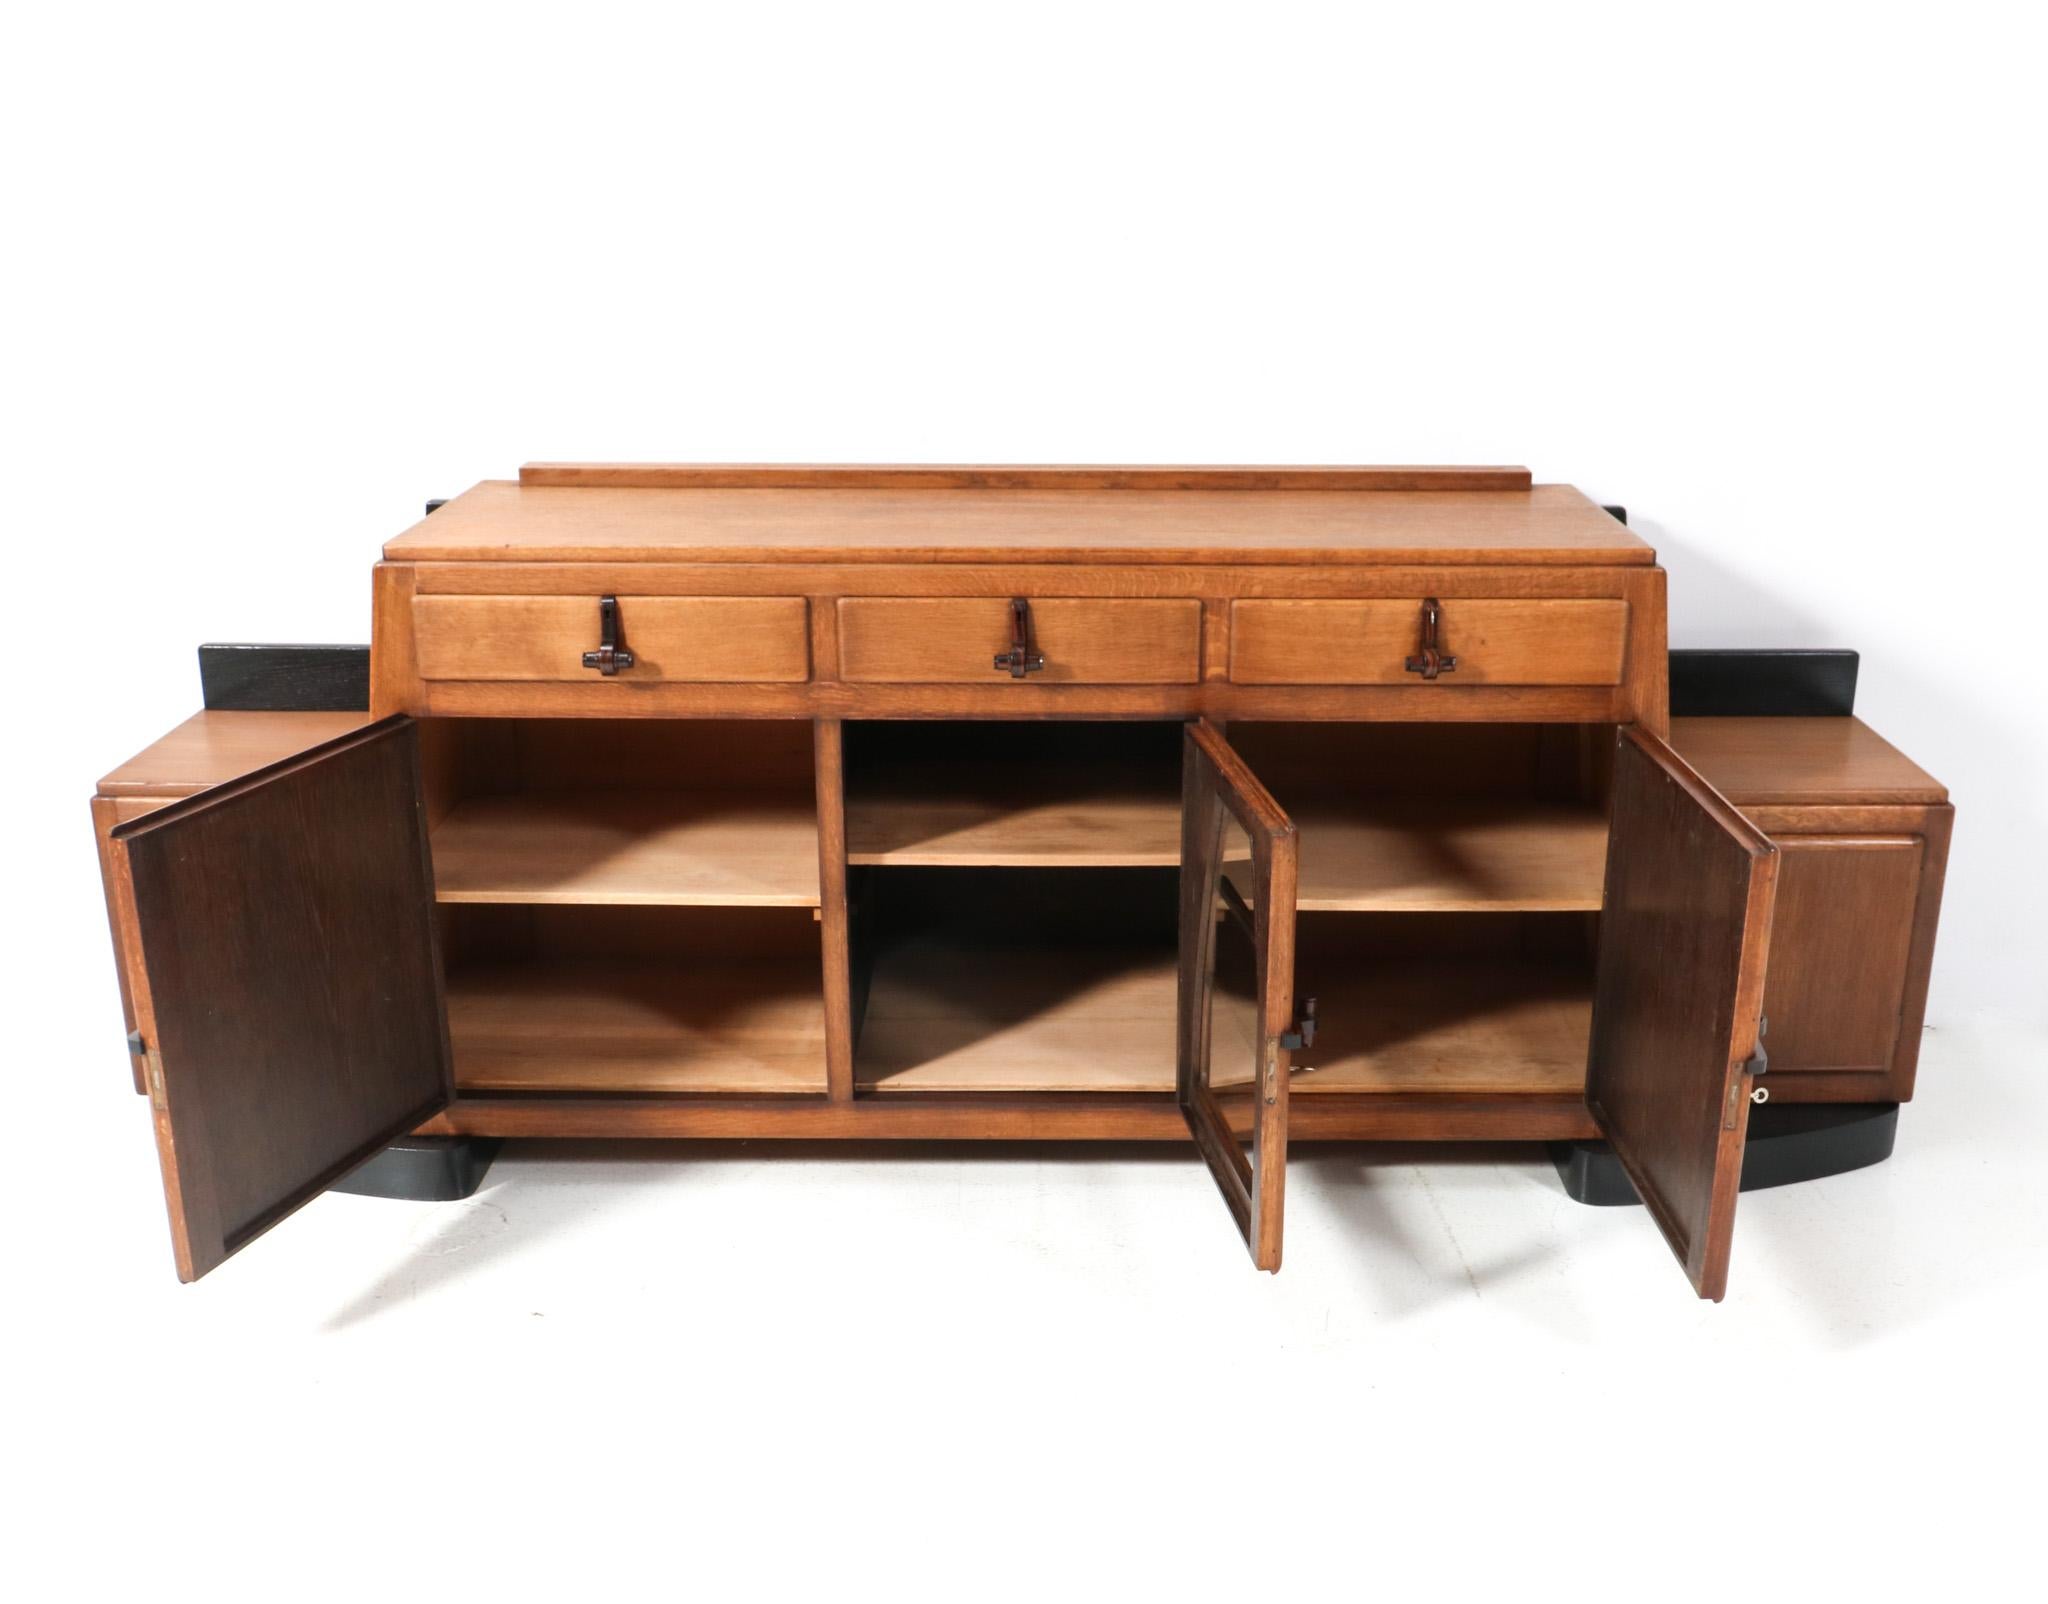 Early 20th Century  Art Deco Amsterdamse School  Credenza by Pieter Vorkink & Jacob Wormser, 1920s For Sale